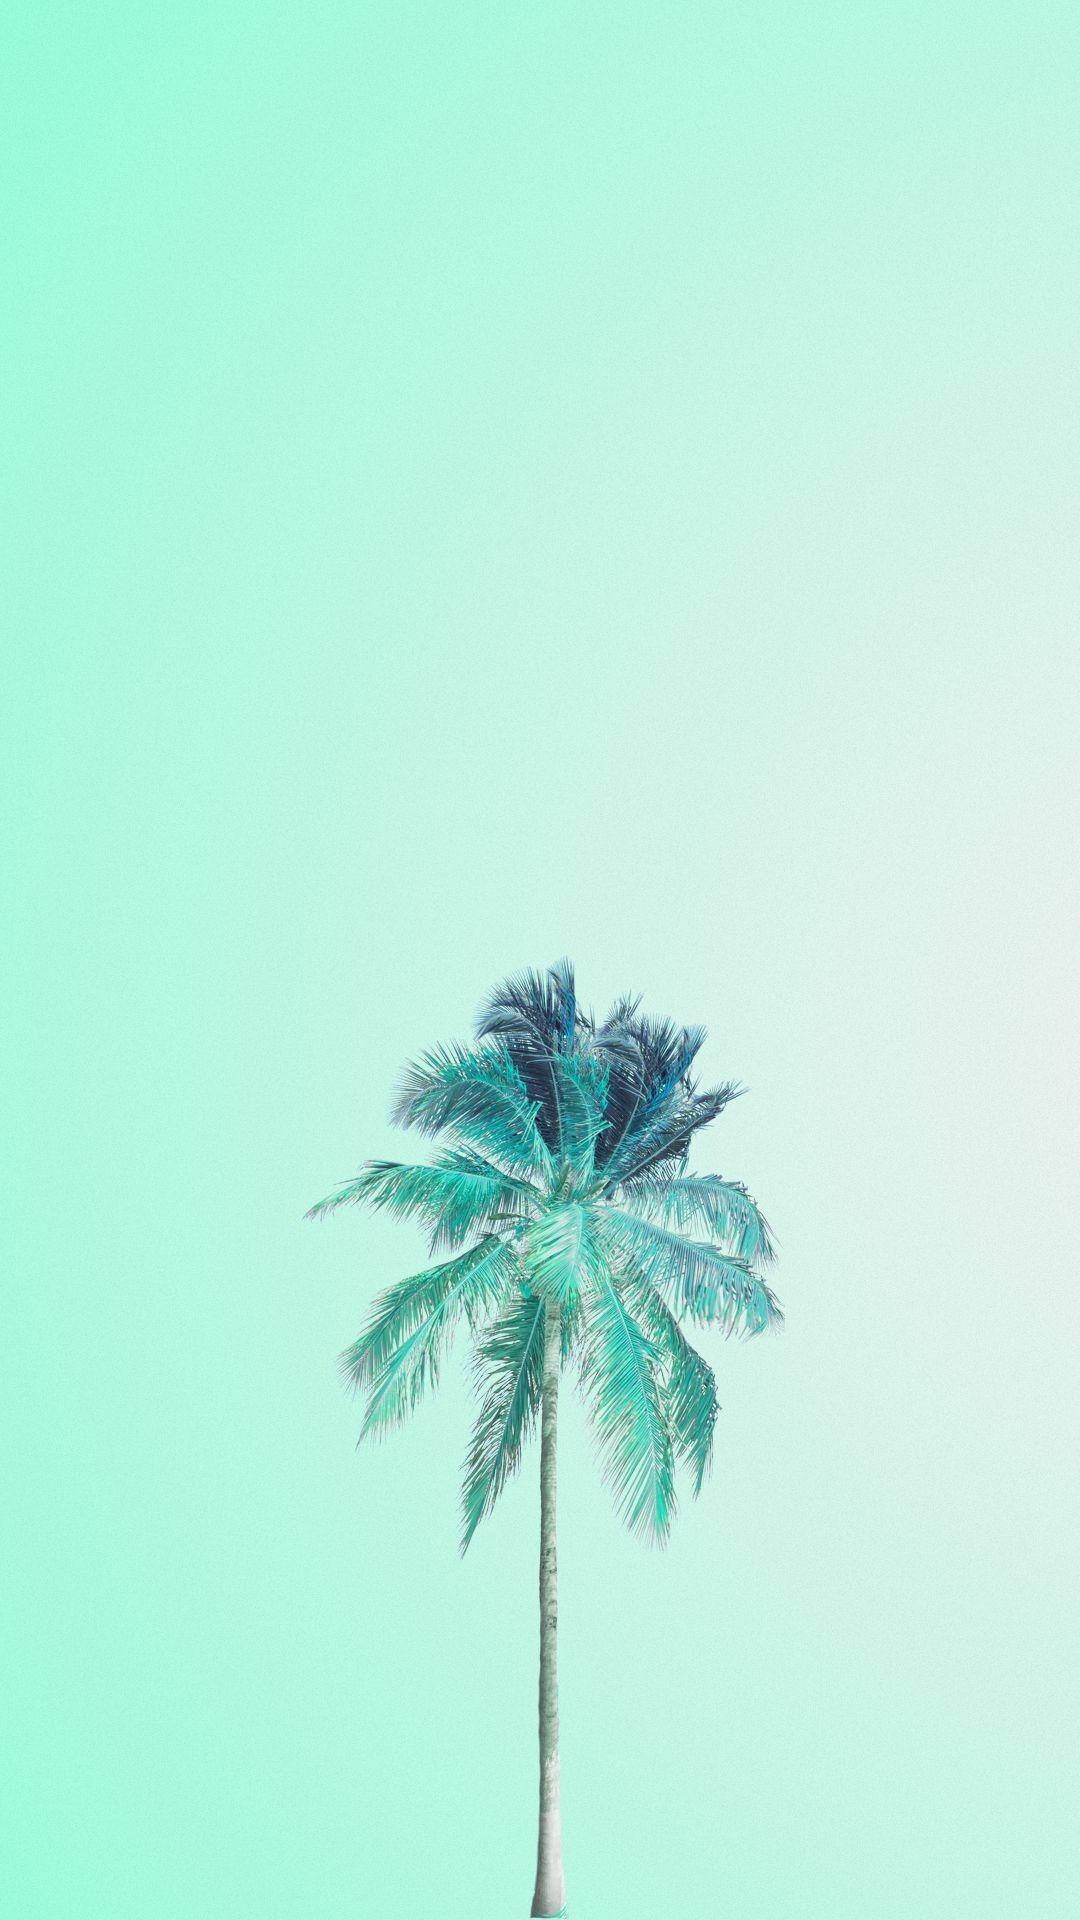 IPhone wallpaper with a palm tree against a blue background - Light green, mint green, soft green